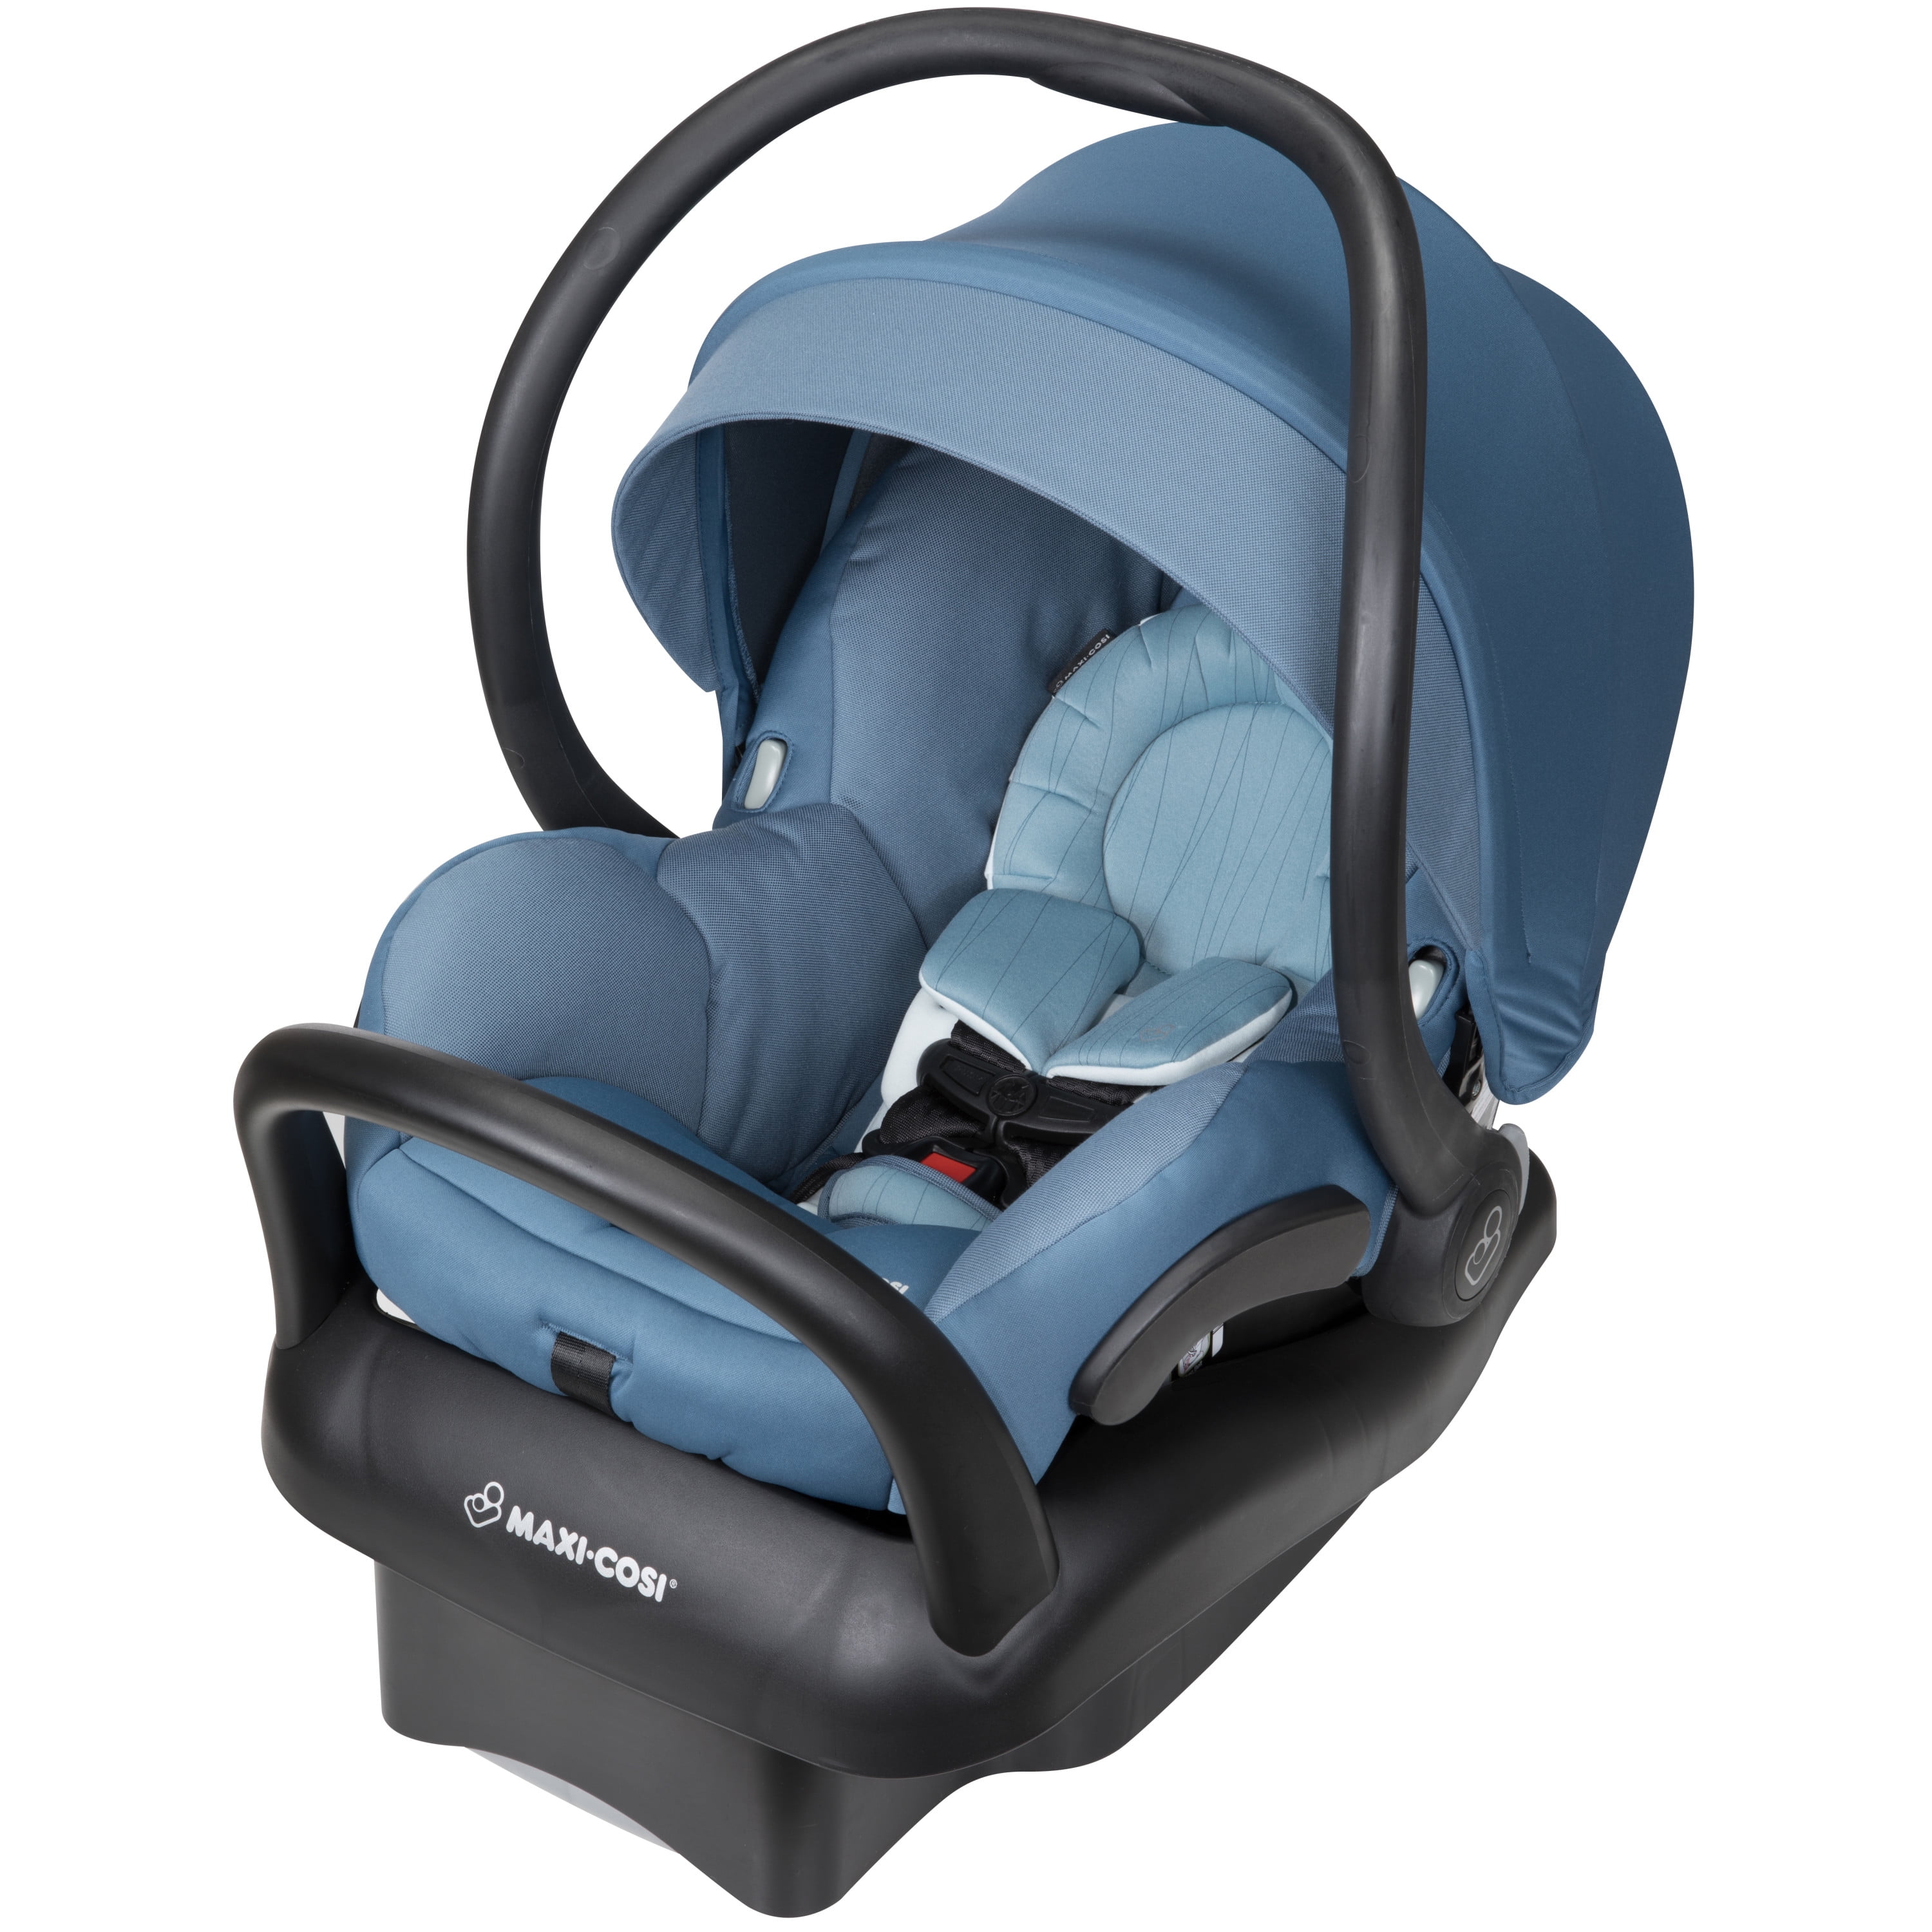 veer Glad Seminarie Maxi Cosi Mico Max 30 Infant Car Seat, Frequency Pink - Walmart.com